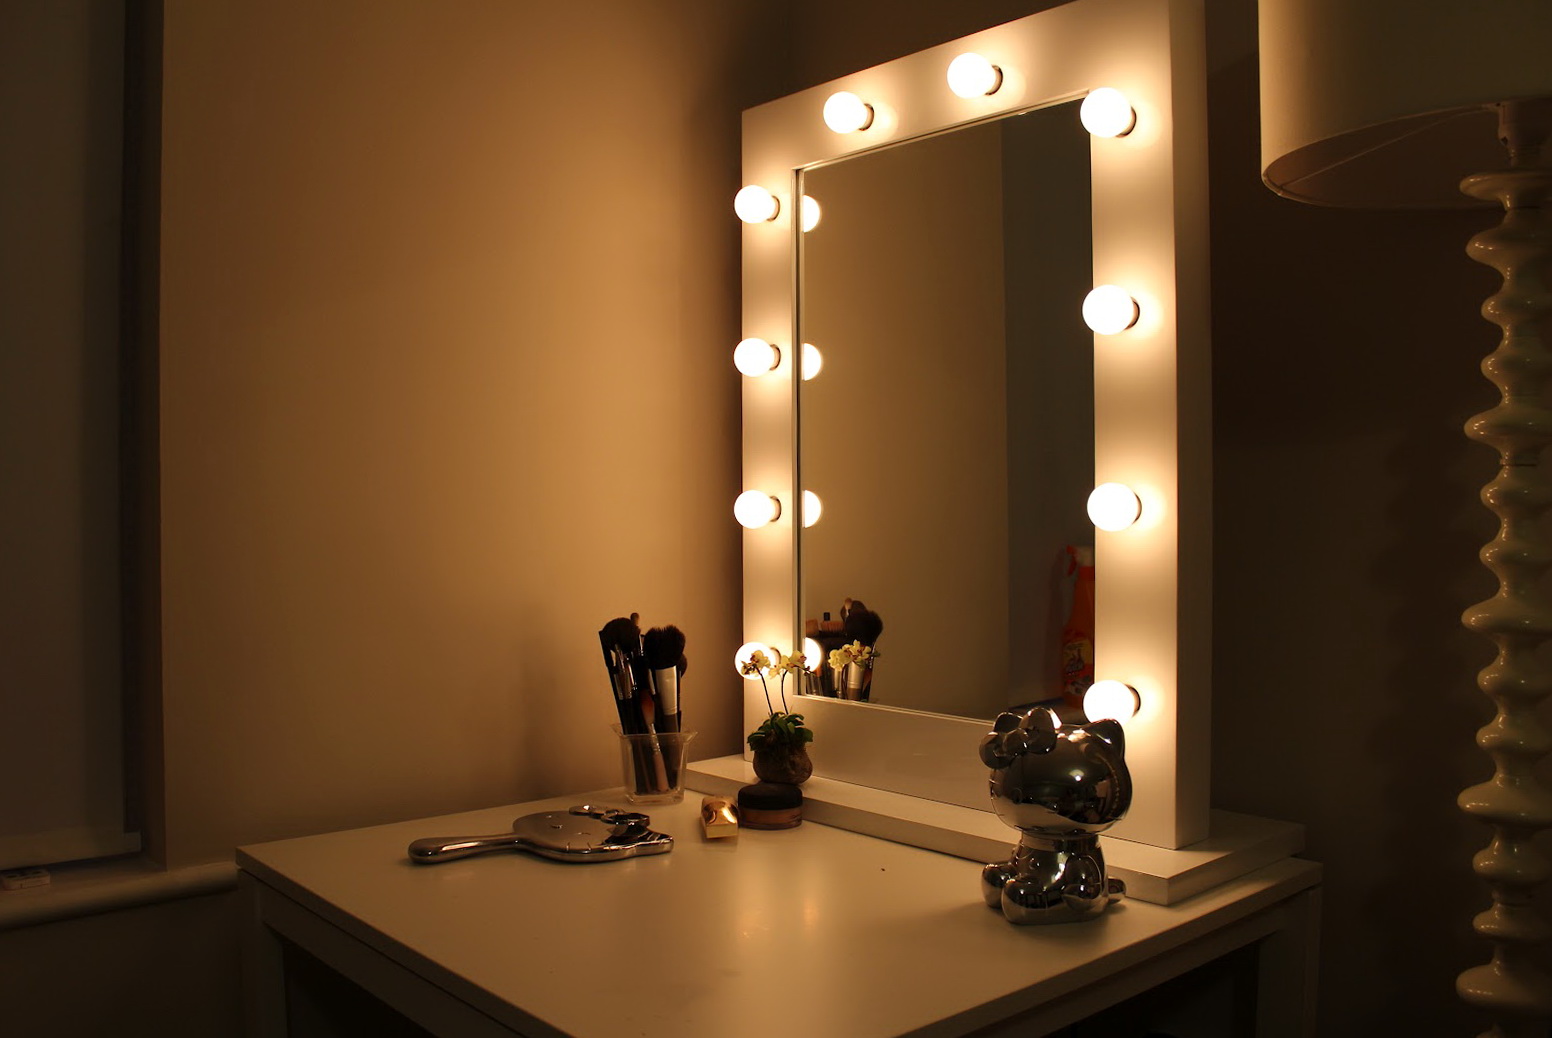 Hollywood Vanity Mirror Impressions Studio Series Vanity Mirrors Are Designed With The Classic Studio In Mind It Comes With Standard Dimmer Hollywood Vanity Mirror With Lights And Desk  sarahcourtyoga.com